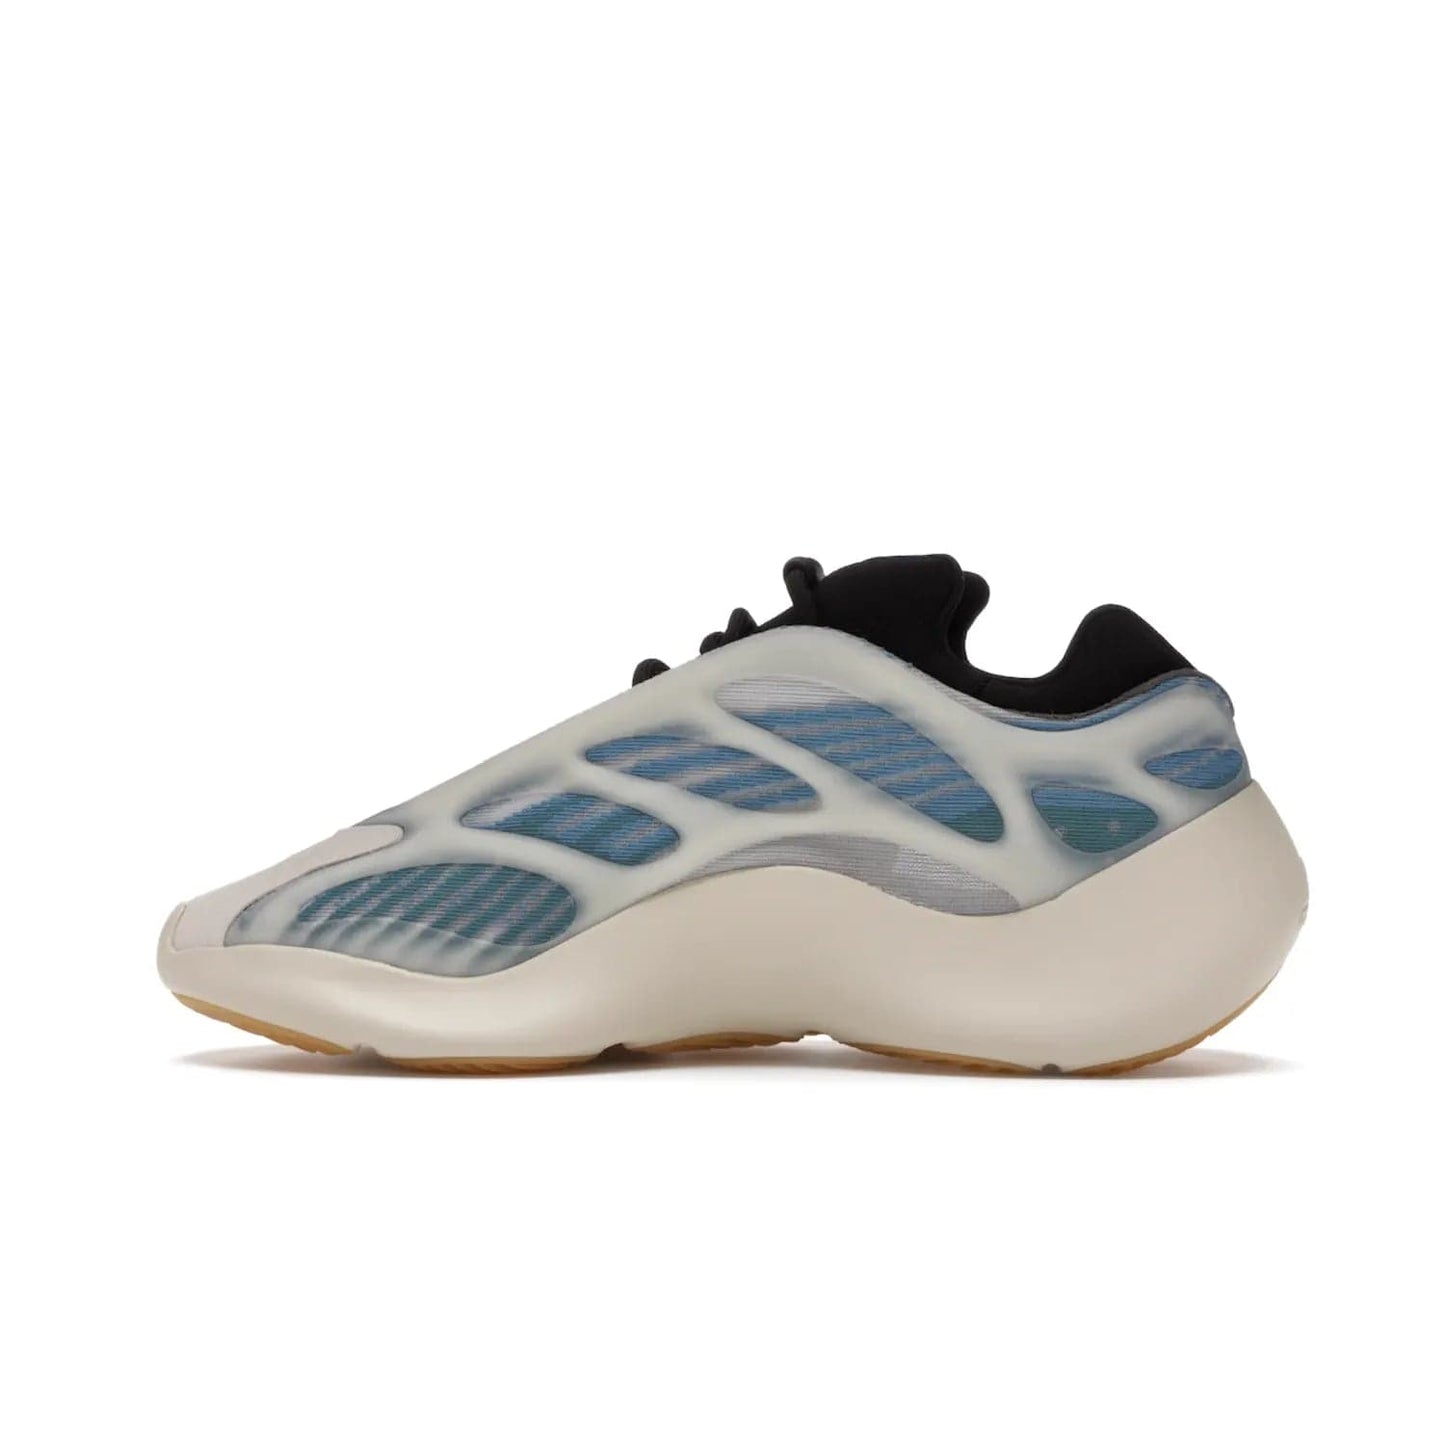 adidas Yeezy 700 V3 Kyanite - Image 20 - Only at www.BallersClubKickz.com - The adidas Yeezy 700 V3 Kyanite offers a layered design featuring a glow-in-the-dark TPU cage and a tonal cream-colored EVA foam midsole. With its herringbone-patterned outsole, the style and comfort of the sneaker will accompany you anywhere. Released in March 2021, it's a great addition to any sneaker wardrobe.